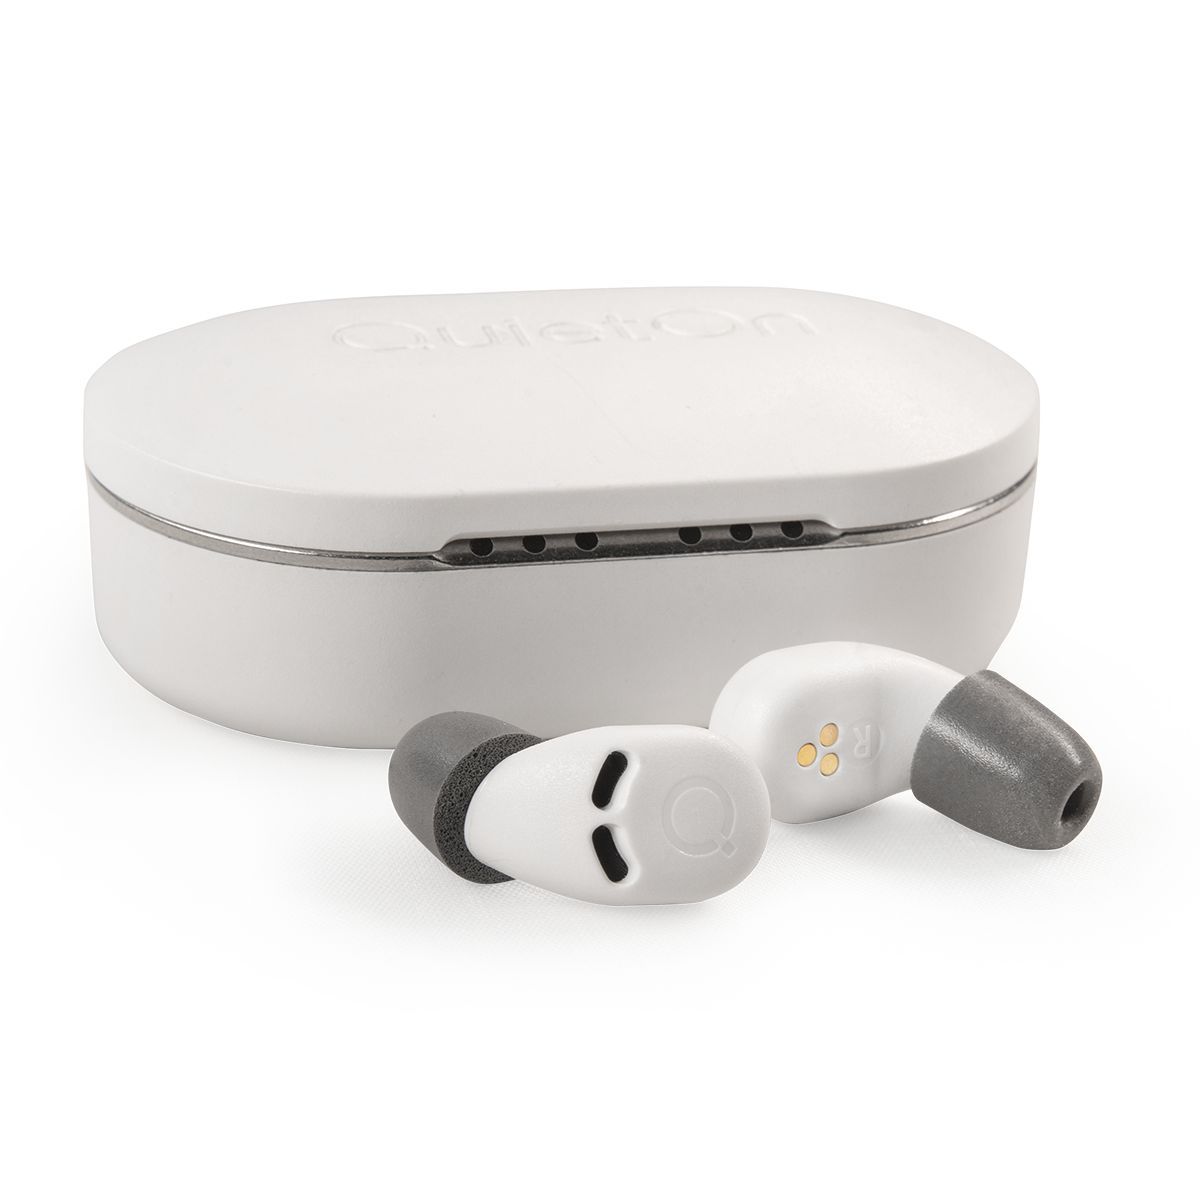 Sleeping with Earbuds: Tips, Tricks and Best Earbuds for Sleeping